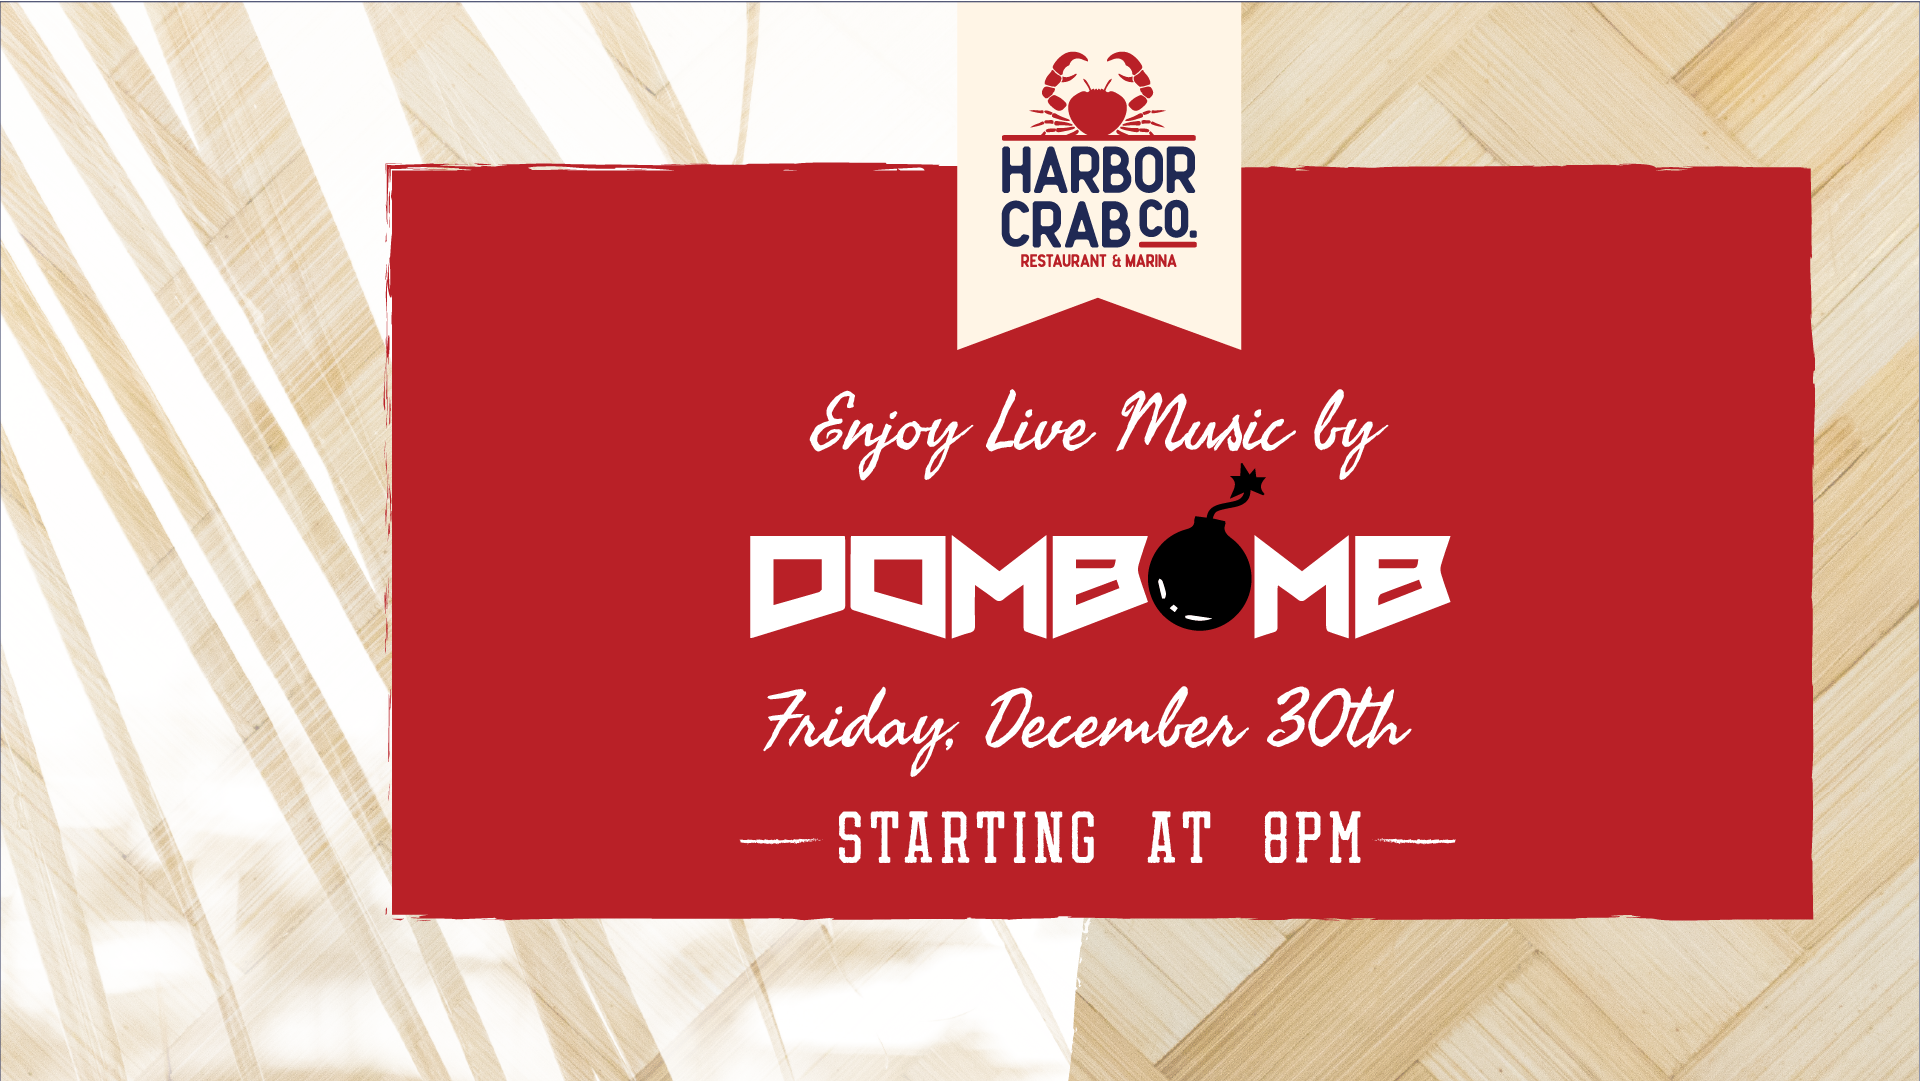 Flyer for DJ Dombomb on Friday, Dec. 30th